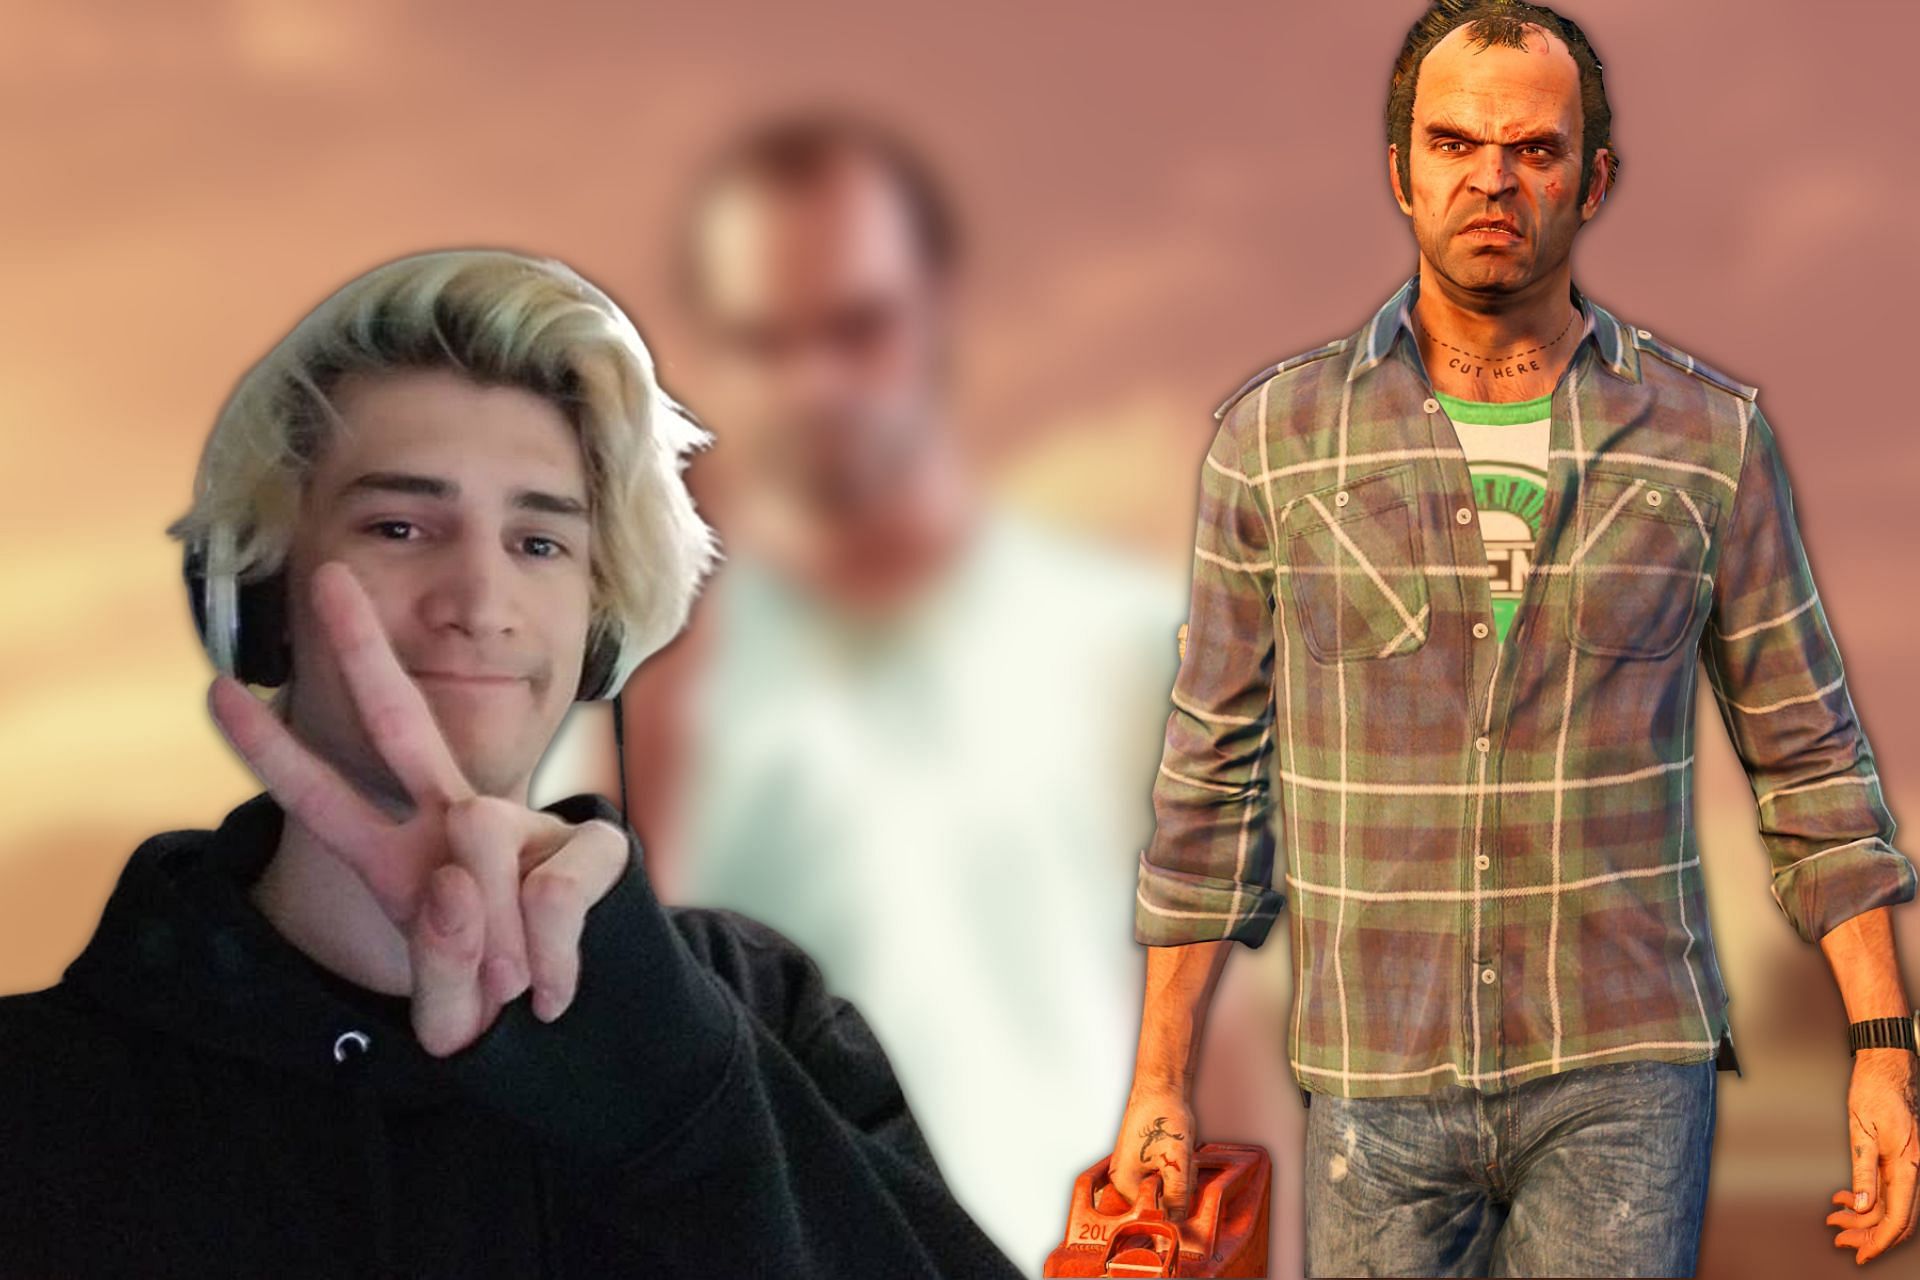 xQc was offered help at bank heists by none other than Trevor Philips from Grand Theft Auto 5 (Image via Sportskeeda)